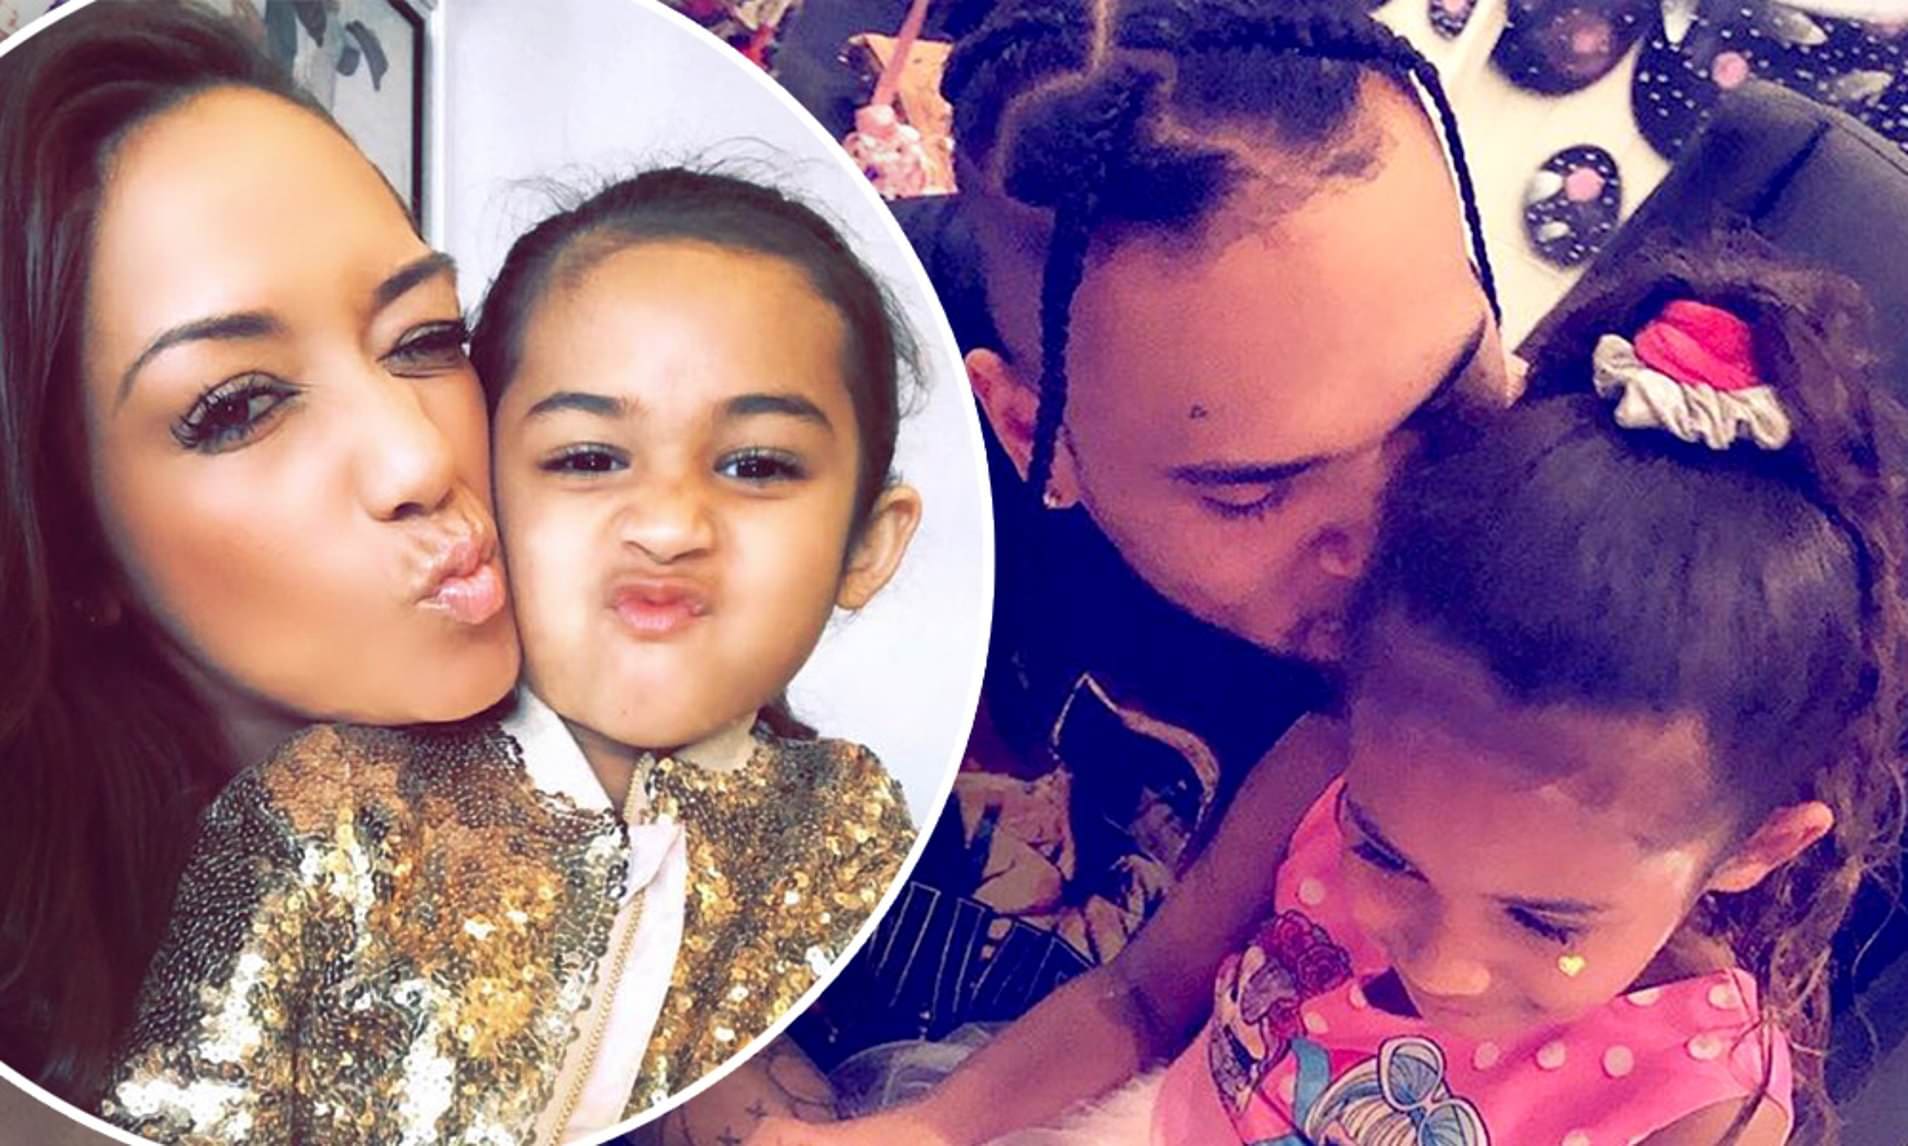 Chris Brown And Nia Guzman Support Their Daughter, Royalty Brown At Her Soccer Match - See The Video